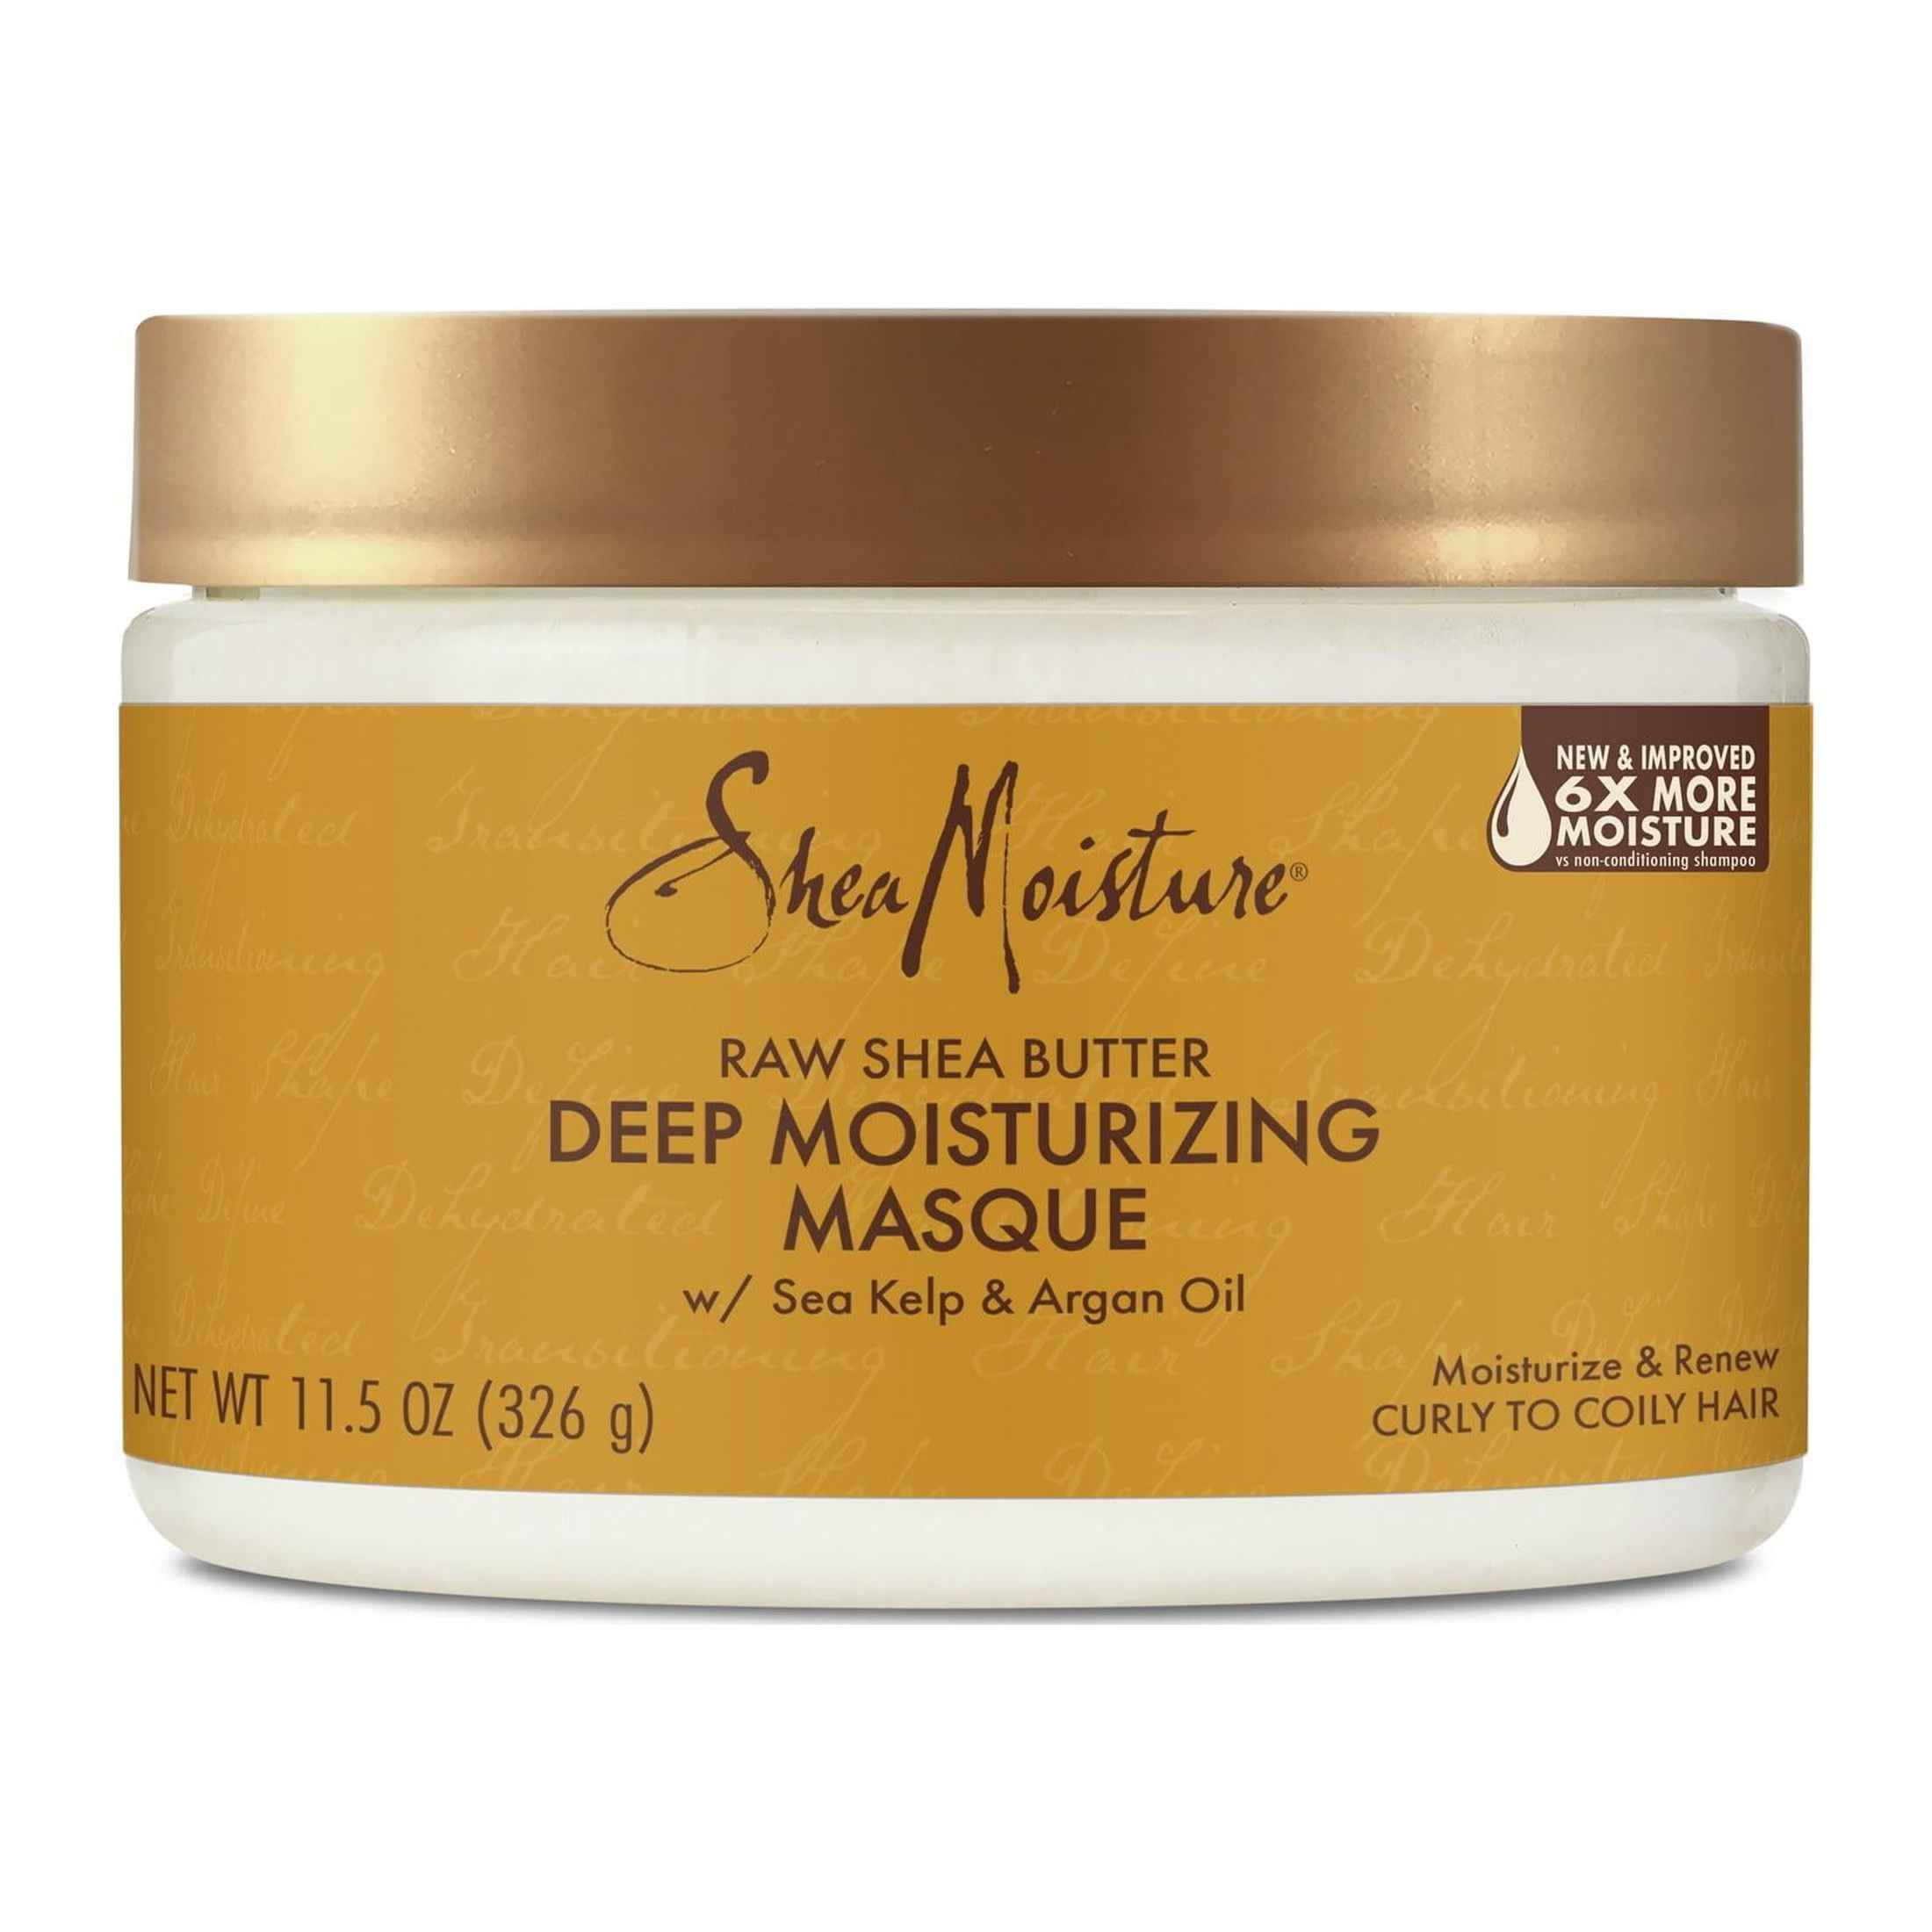 Shea moisture affordable hair care products 